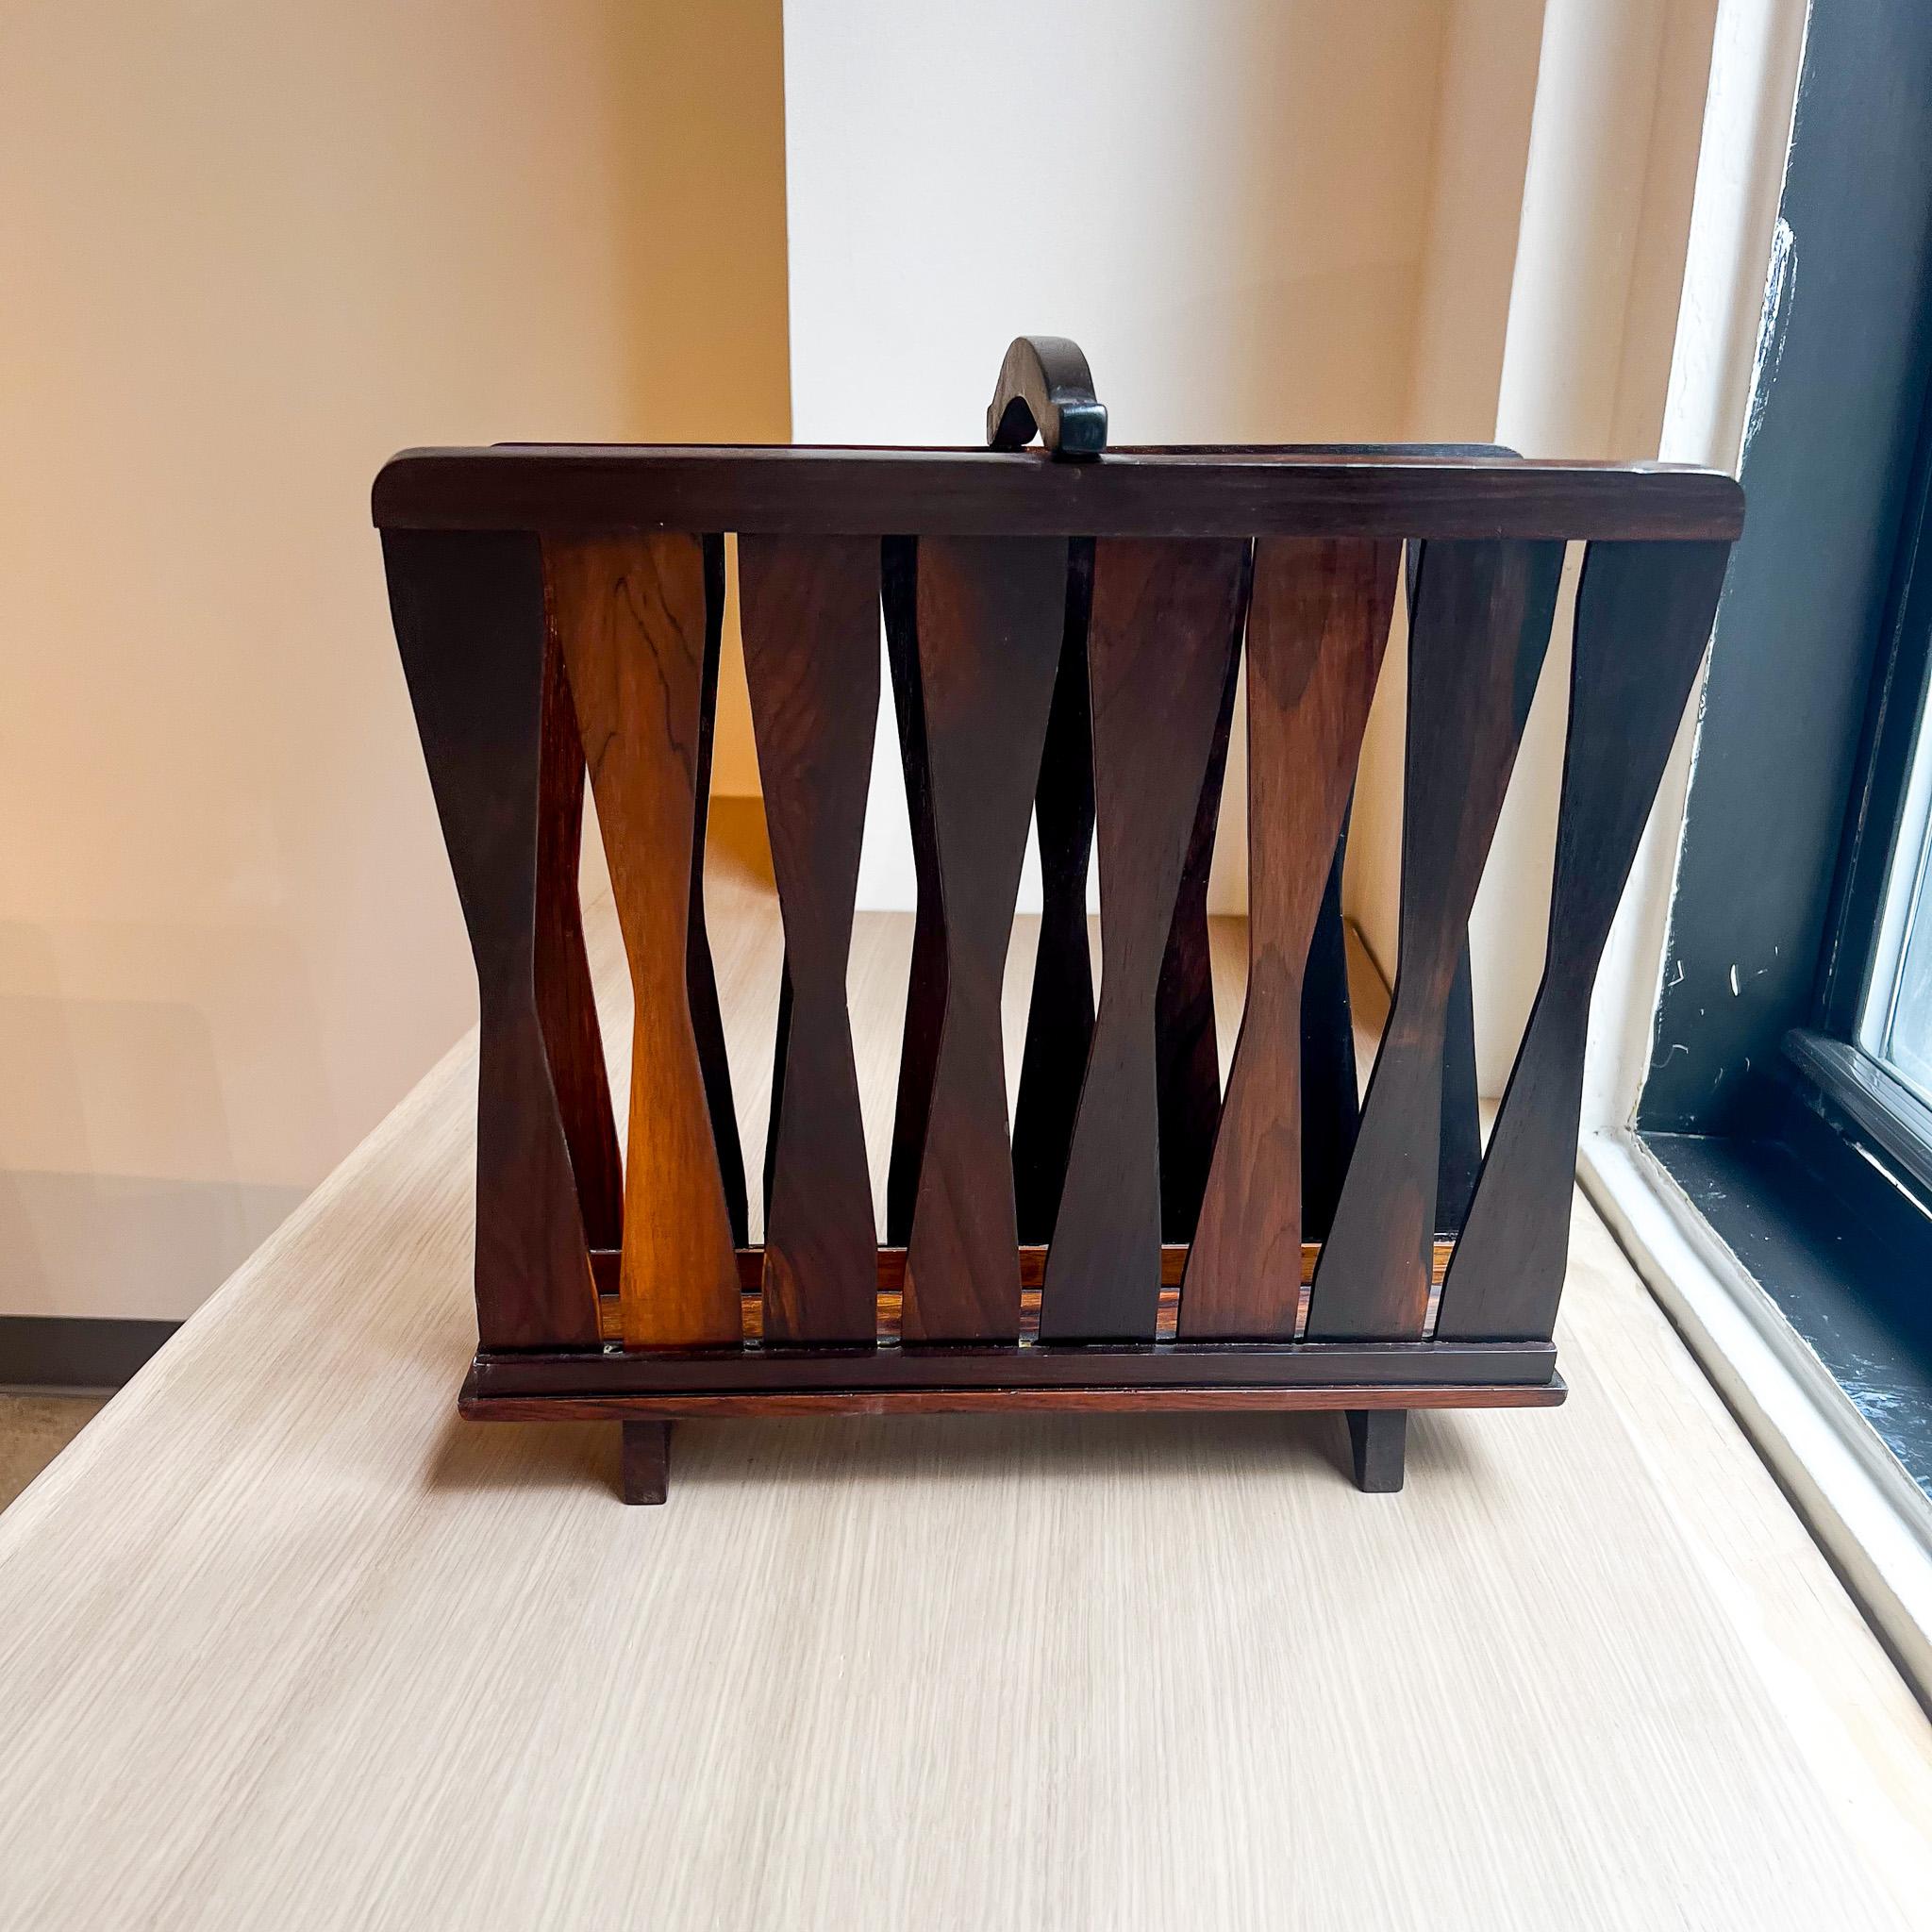 Available today, this Brazilian Modern magazine rack in Jacaranda hardwood is stunning!

This magazine rack is made with Brazilian Rosewood which is also known as Jacaranda hardwood. It is a dark brown color and would be a perfect fit for any